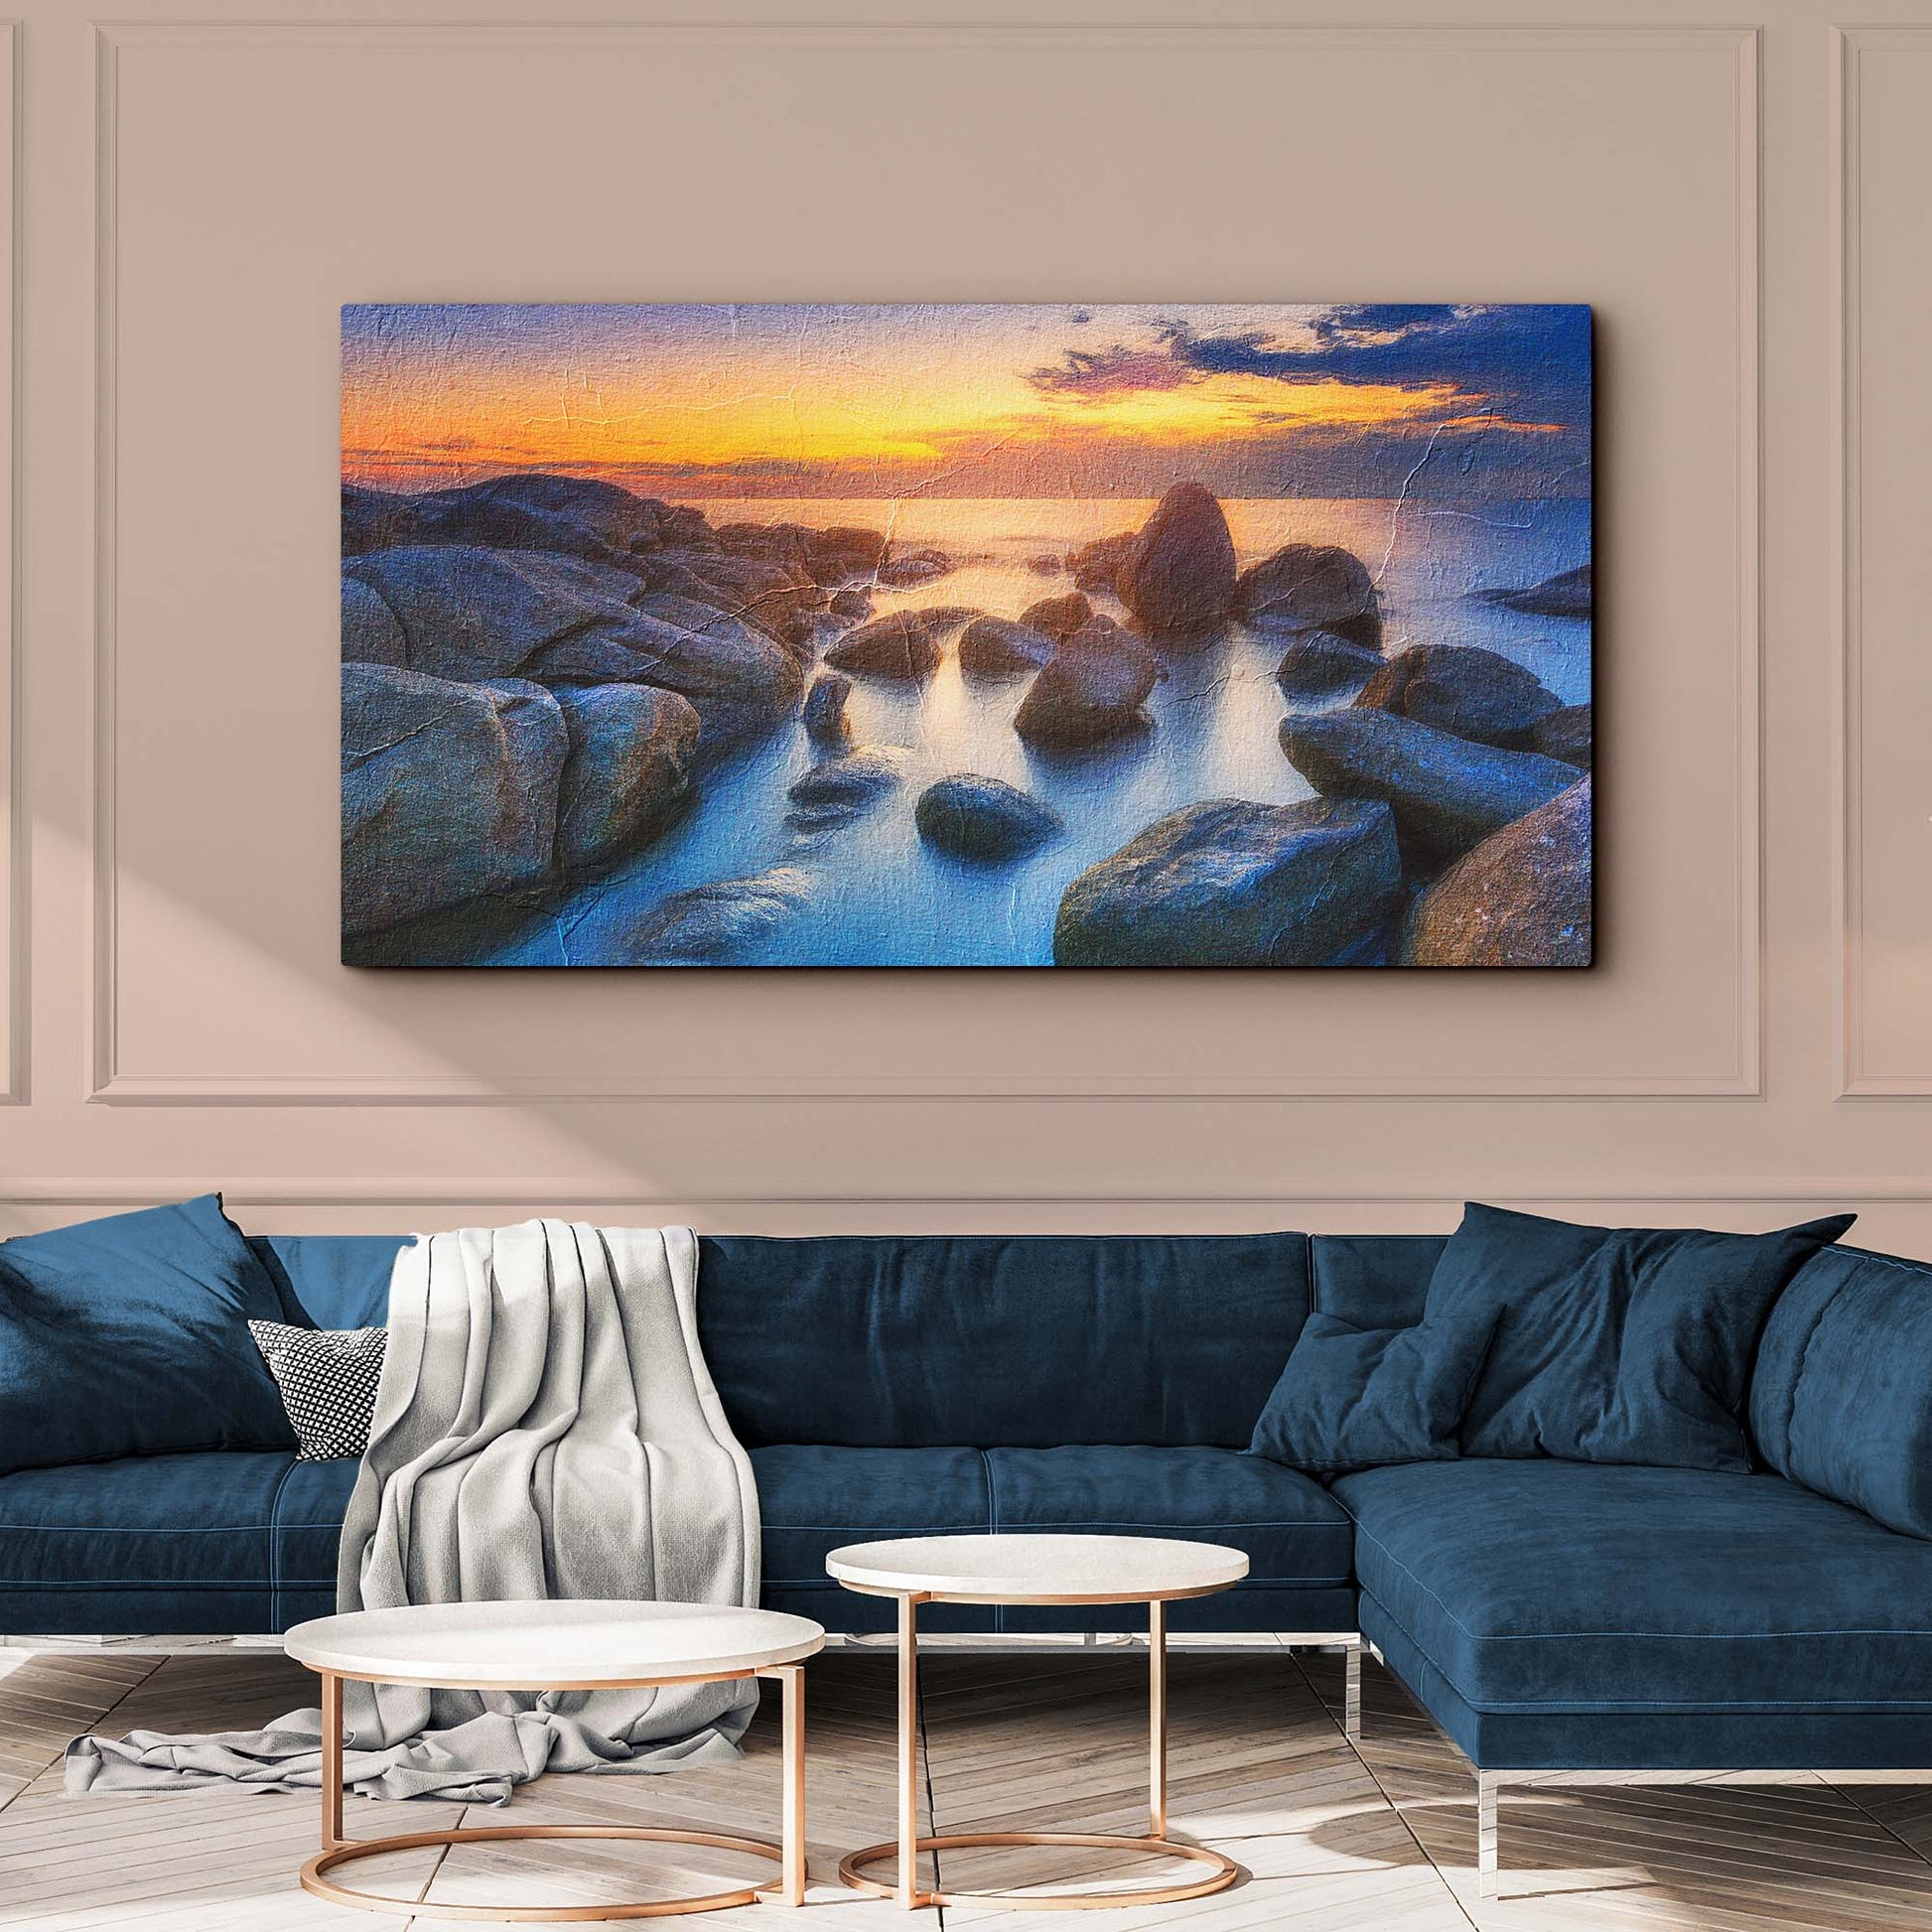 Seascape At Sunrise Canvas Wall Art Style 2 - Image by Tailored Canvases